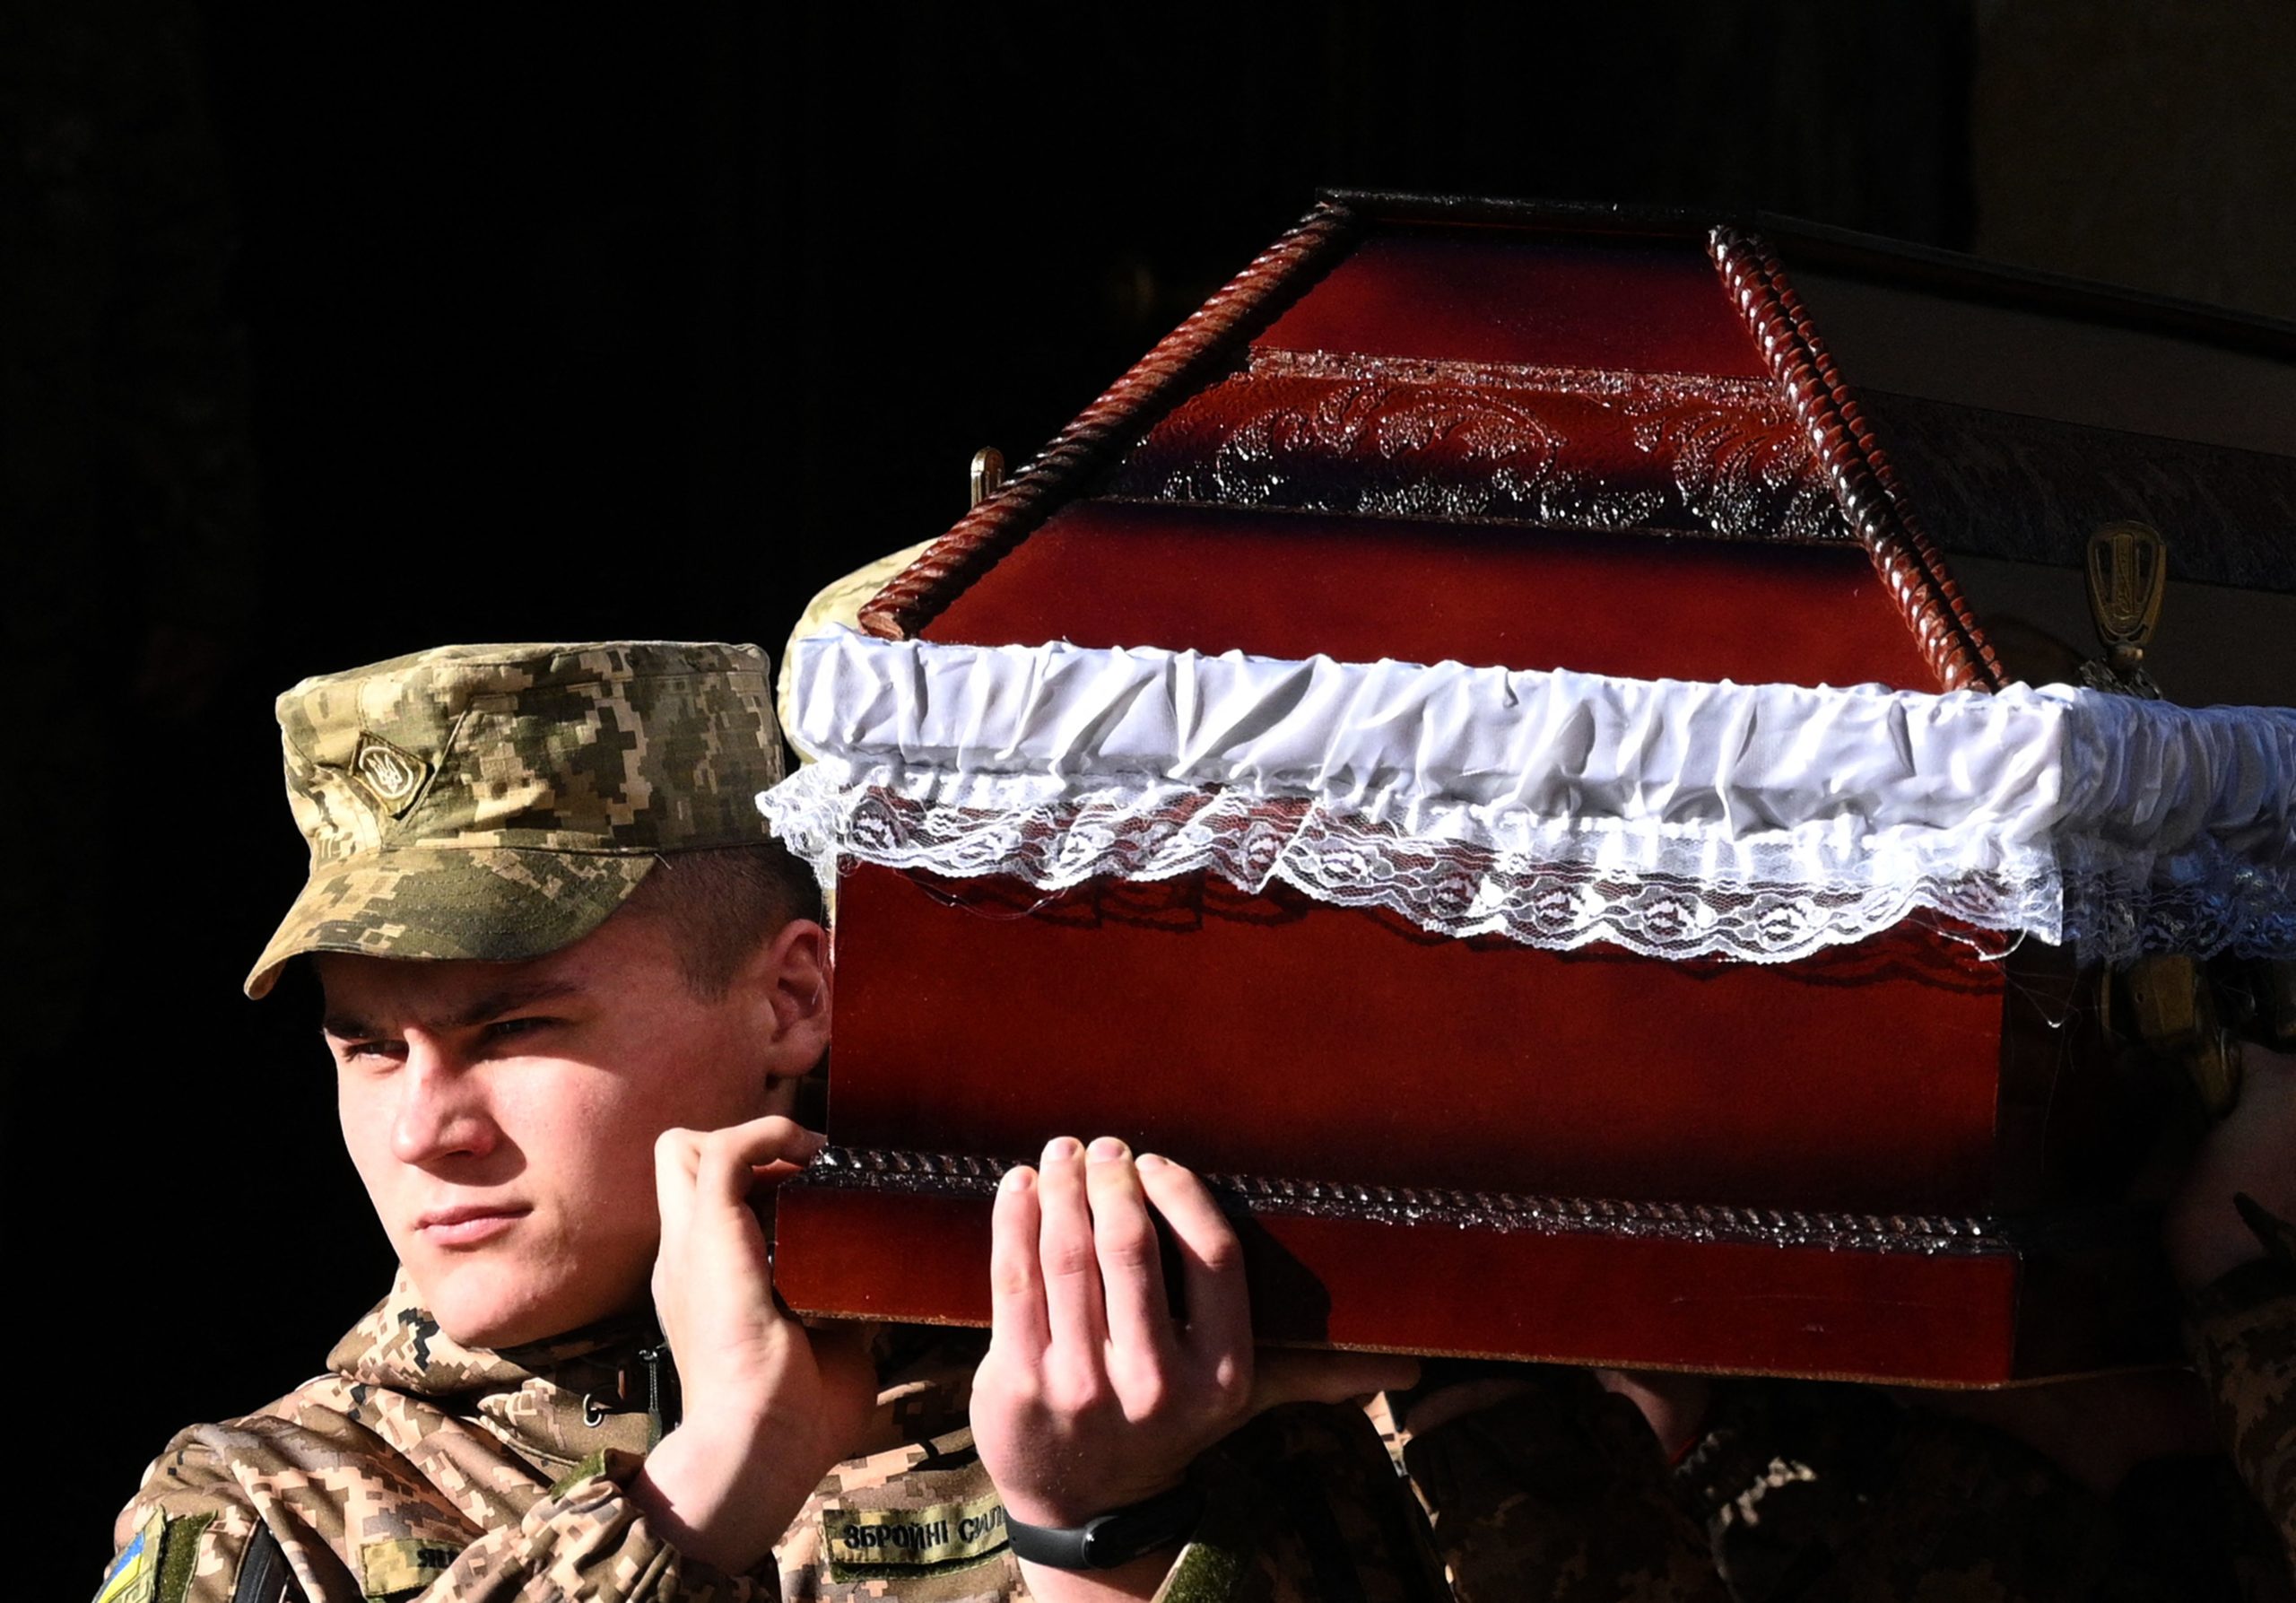 Soldiers carry the coffin of late Ukrainian serviceman Taras-Timofiy Havrylyshyn, member of the Plast Ukrainian scouting organization, during a funeral ceremony in the western Ukrainian city of Lviv, on November 9, 2022, amid the Russian invasion of Ukraine.